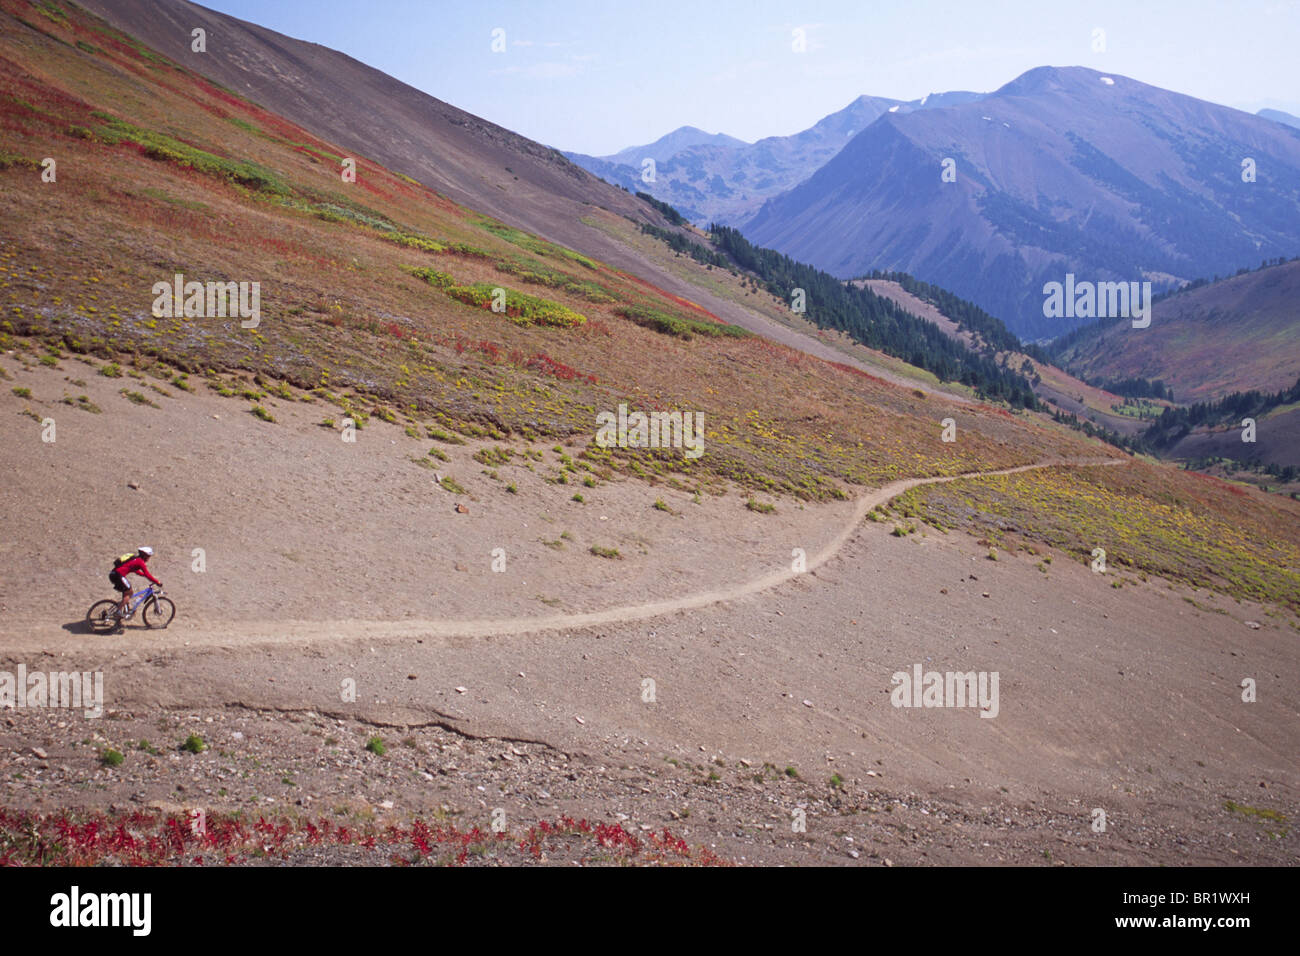 A mountain biker rides a high mountain trail in the Lower Chilchooten Range of British Columbia, Canada Stock Photo